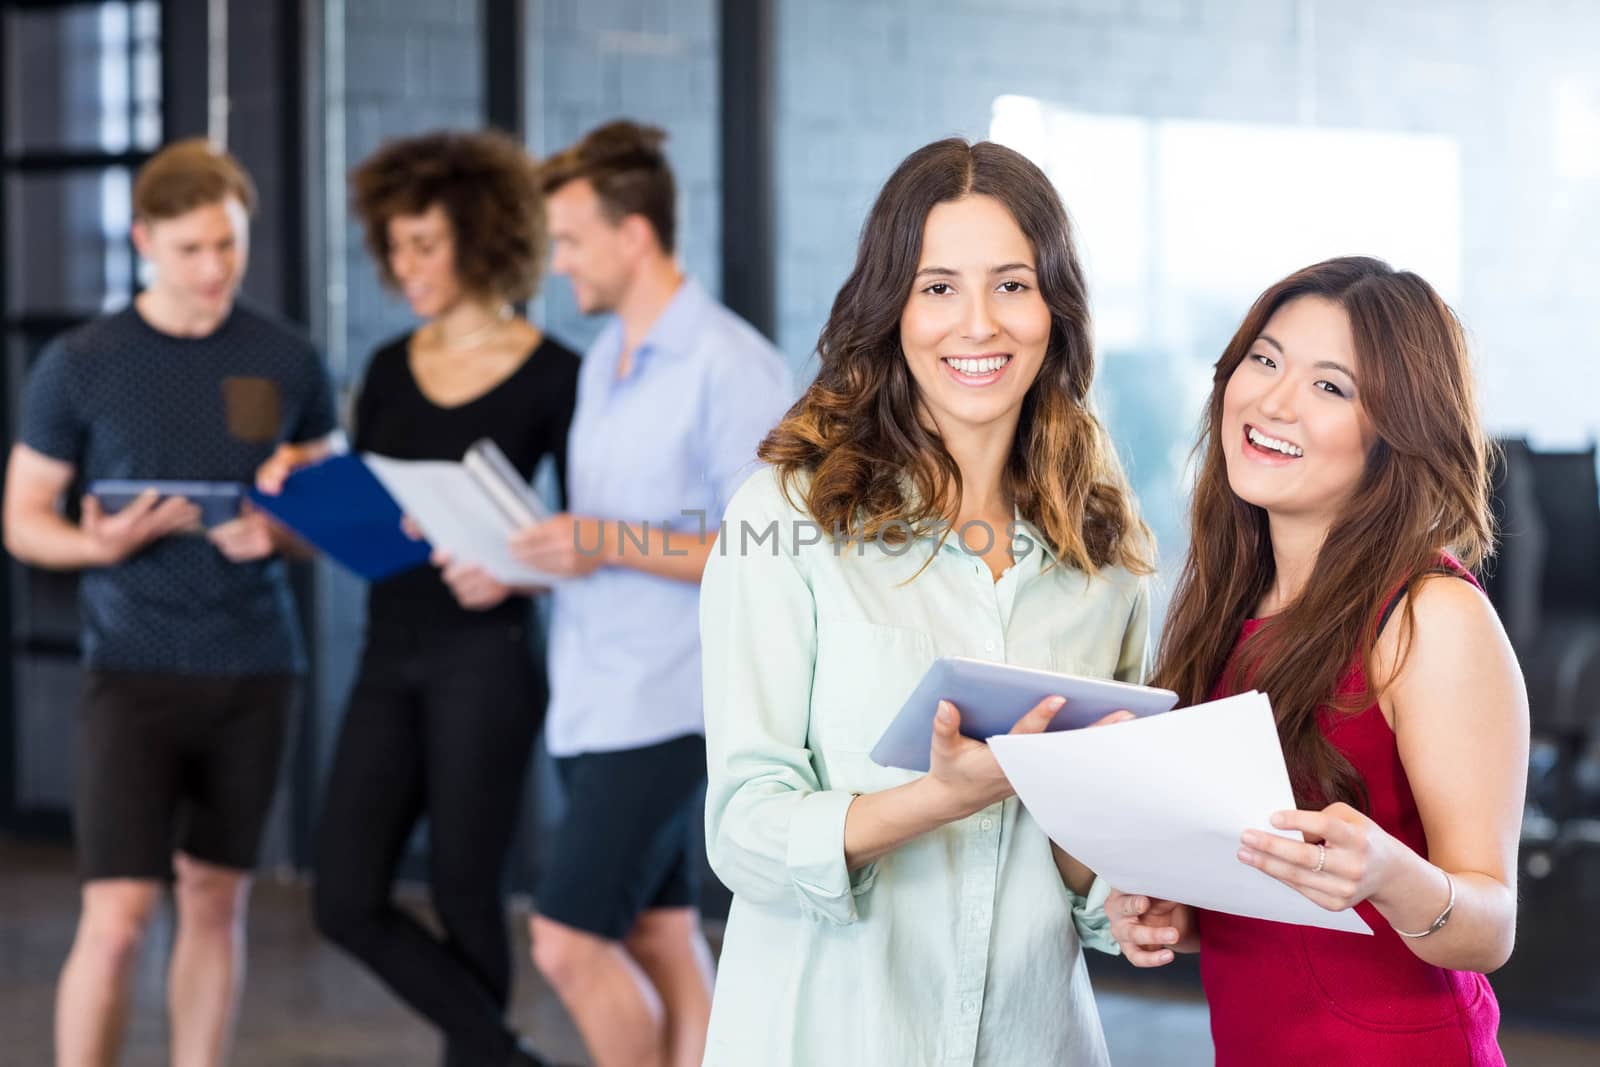 Portrait of women holding digital tablet and smiling while colleagues standing behind in office